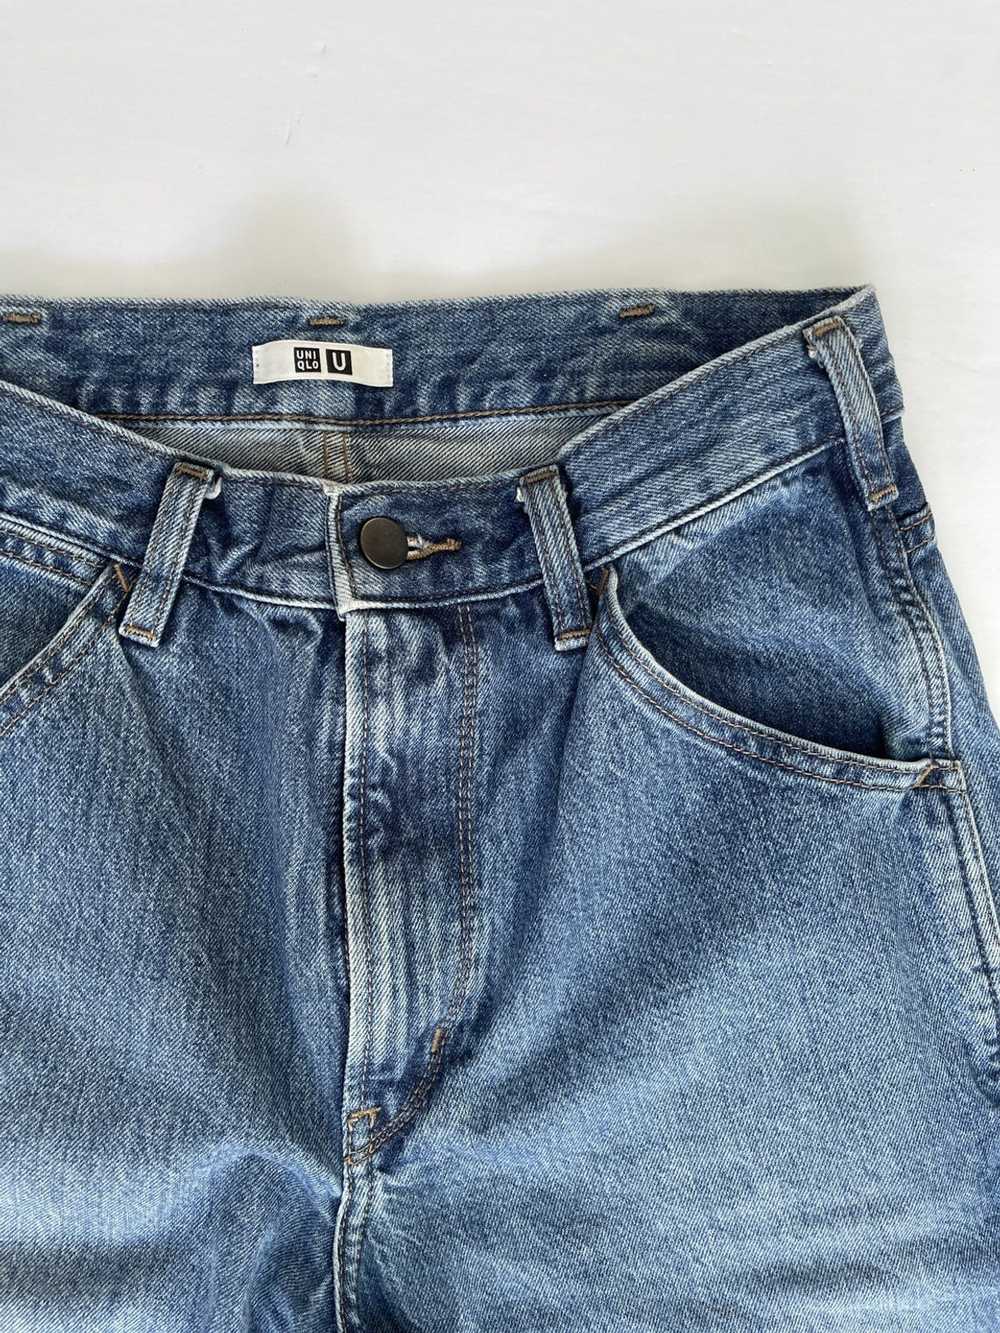 Uniqlo Cropped Baggy Mom Jeans - image 2